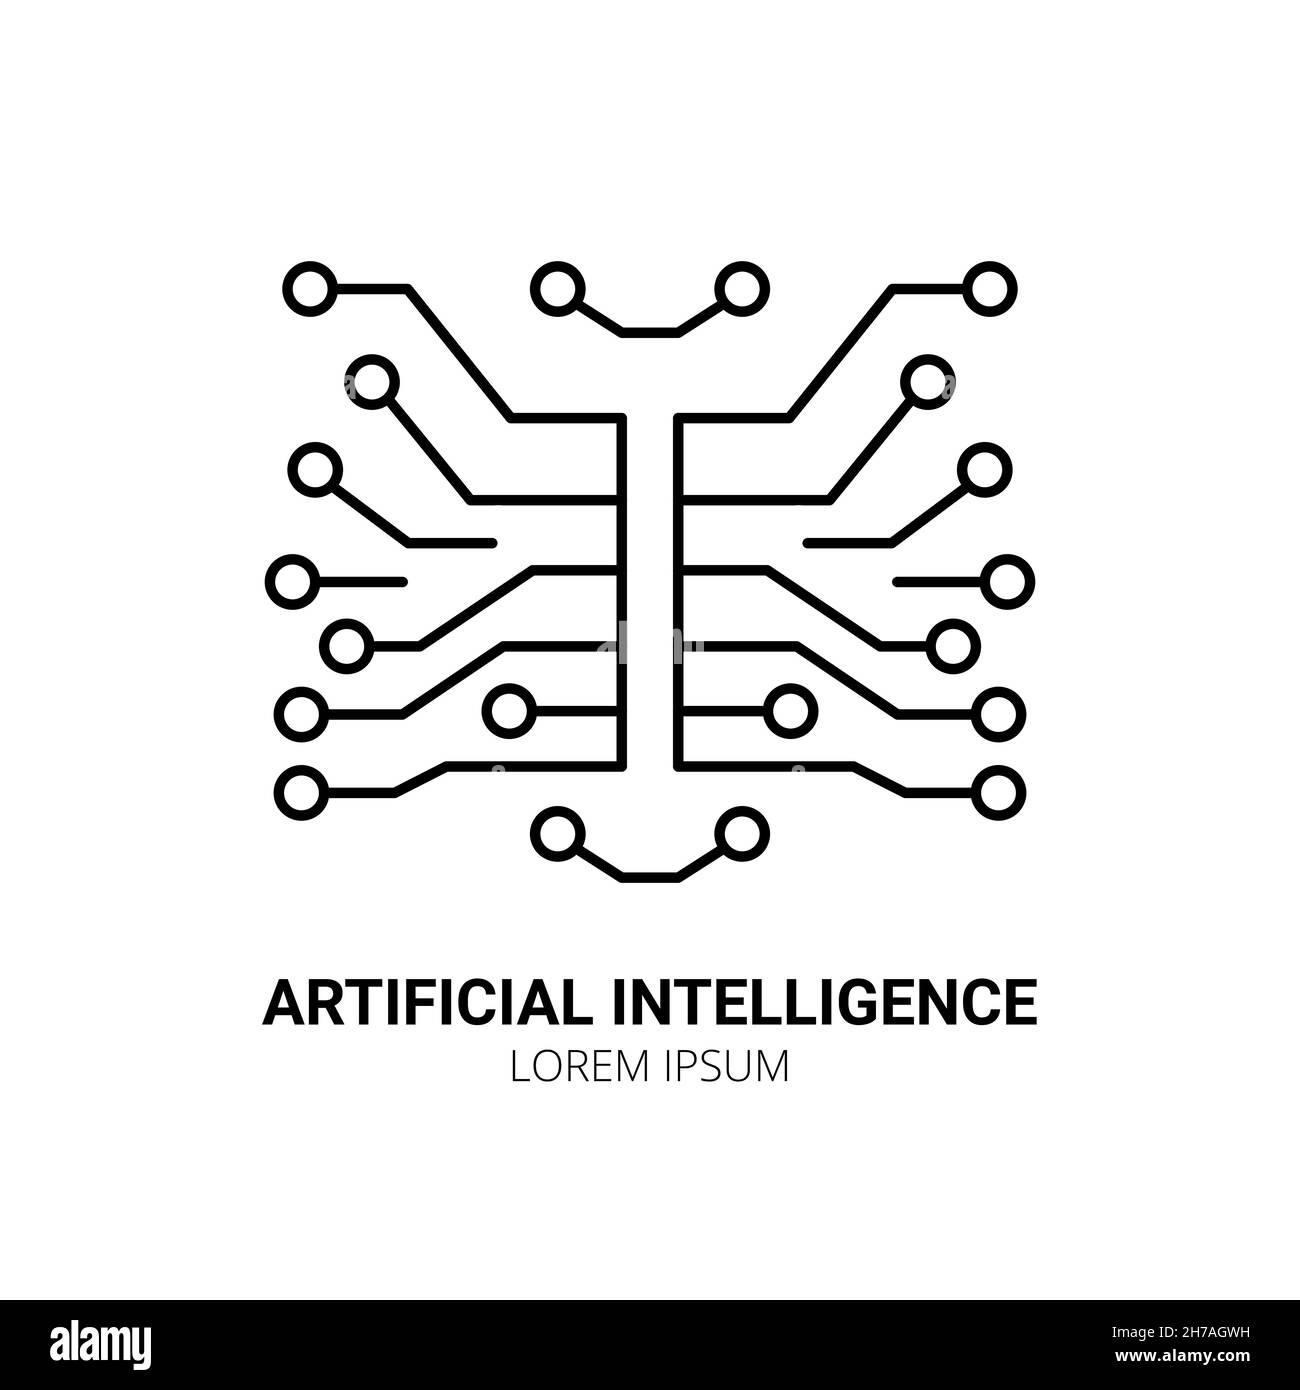 https://c8.alamy.com/comp/2H7AGWH/artificial-intelligence-and-machine-learning-line-icon-2H7AGWH.jpg